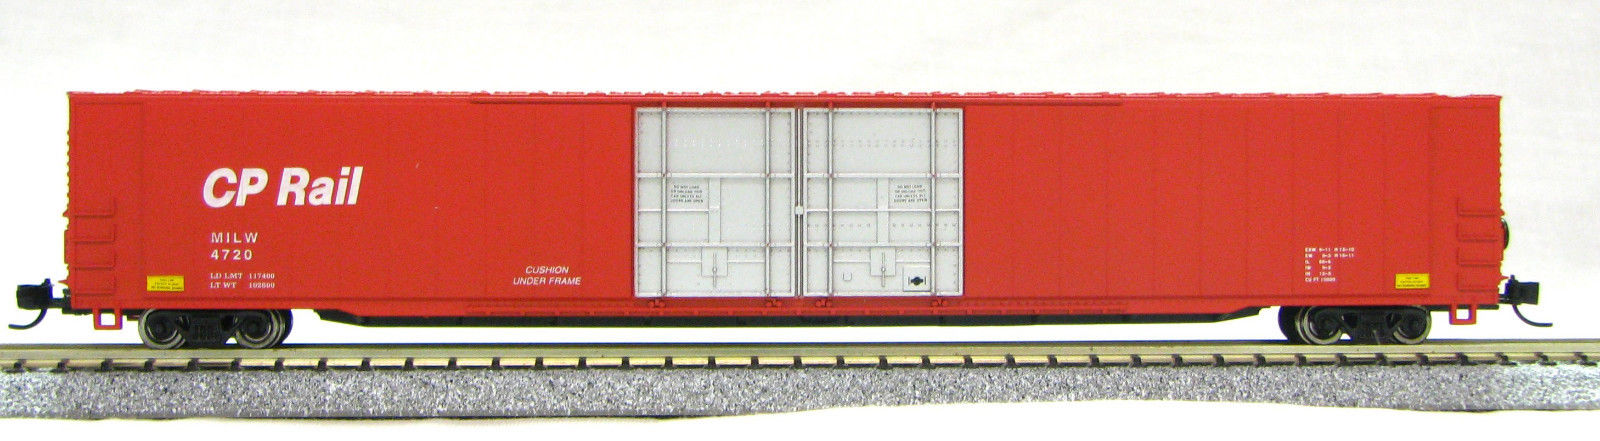 MILW 4 Door Auto Parts Box Car Red Details about   N Scale Canadian Pacific 